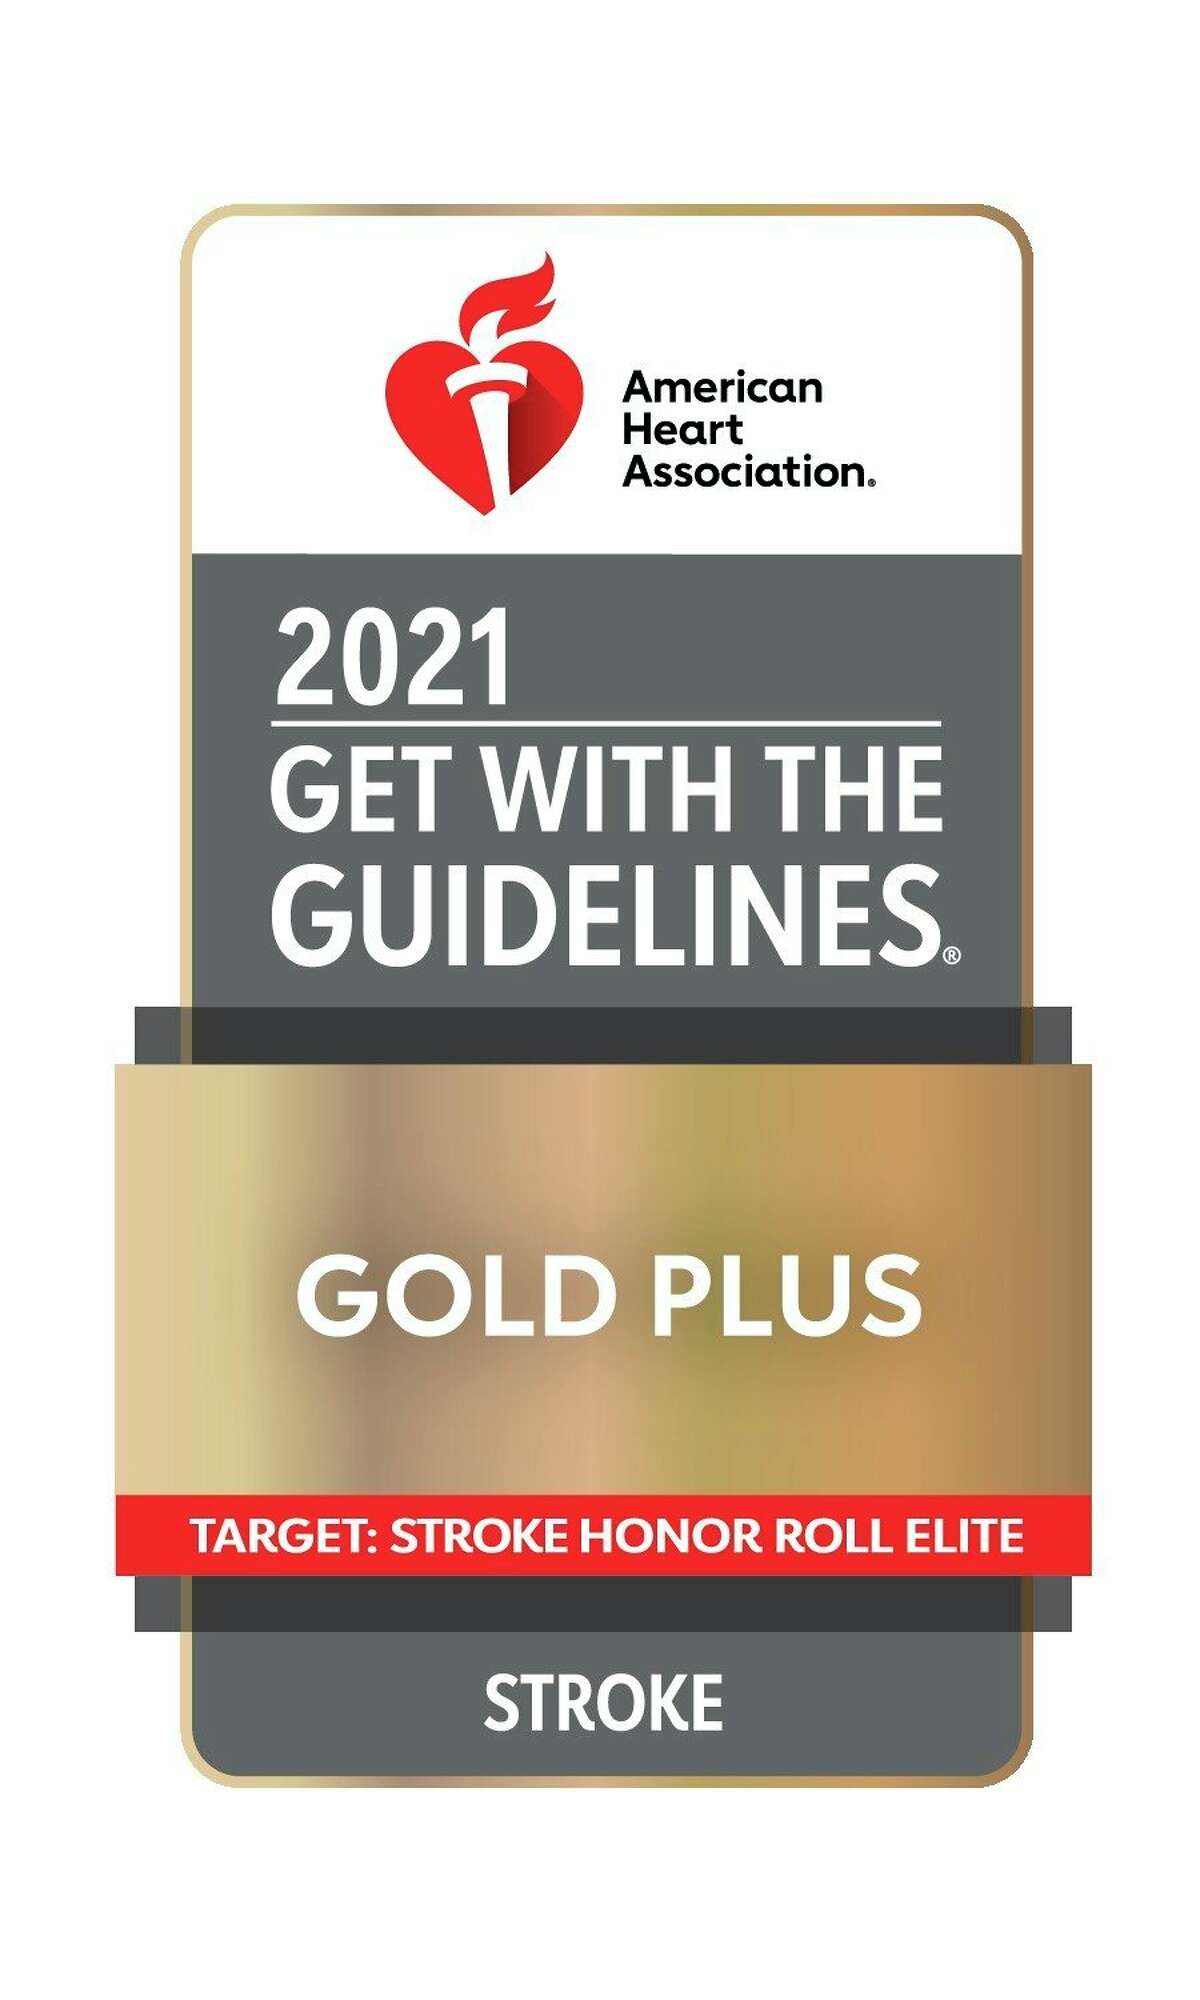 Munson Medical Center has been honored with the 2021 Get With The Guidelines Stroke Gold Plus Award along with the Target Stroke Honor Roll Elite Award. (Courtesy Photo)